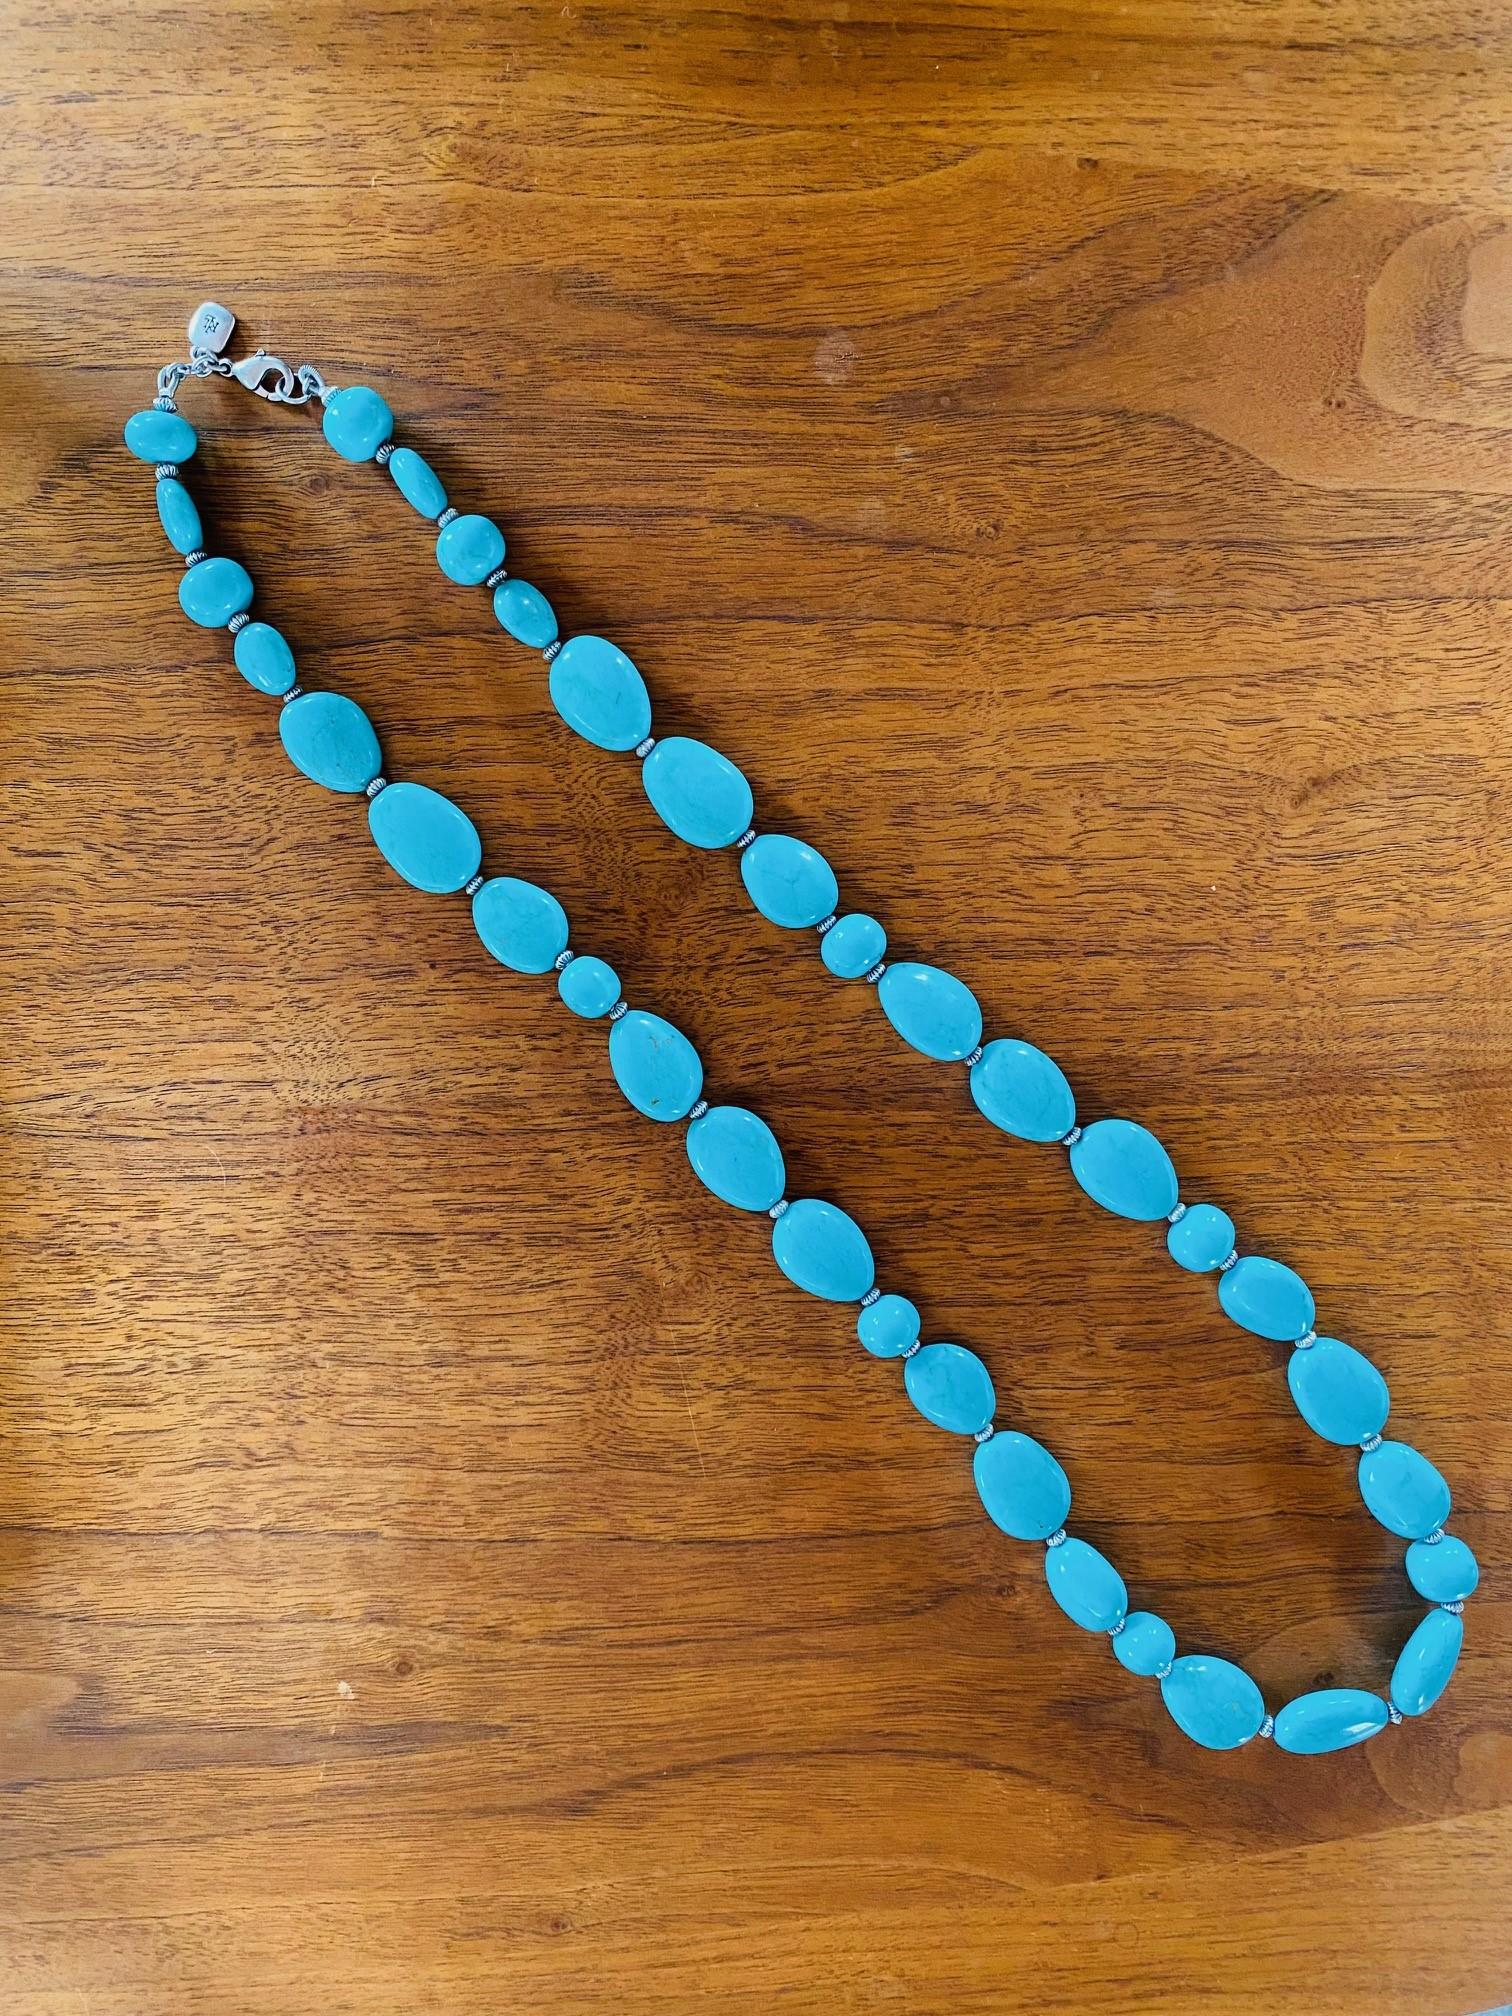 Beautiful vintage turquoise long necklace by Ralph Lauren.  This beautiful piece of jewelry is timeless, bohemian and chic.  This line of stone jewelry by Ralph Lauren is coveted as it is chic.  The beautiful shade of turquoise blue will complement